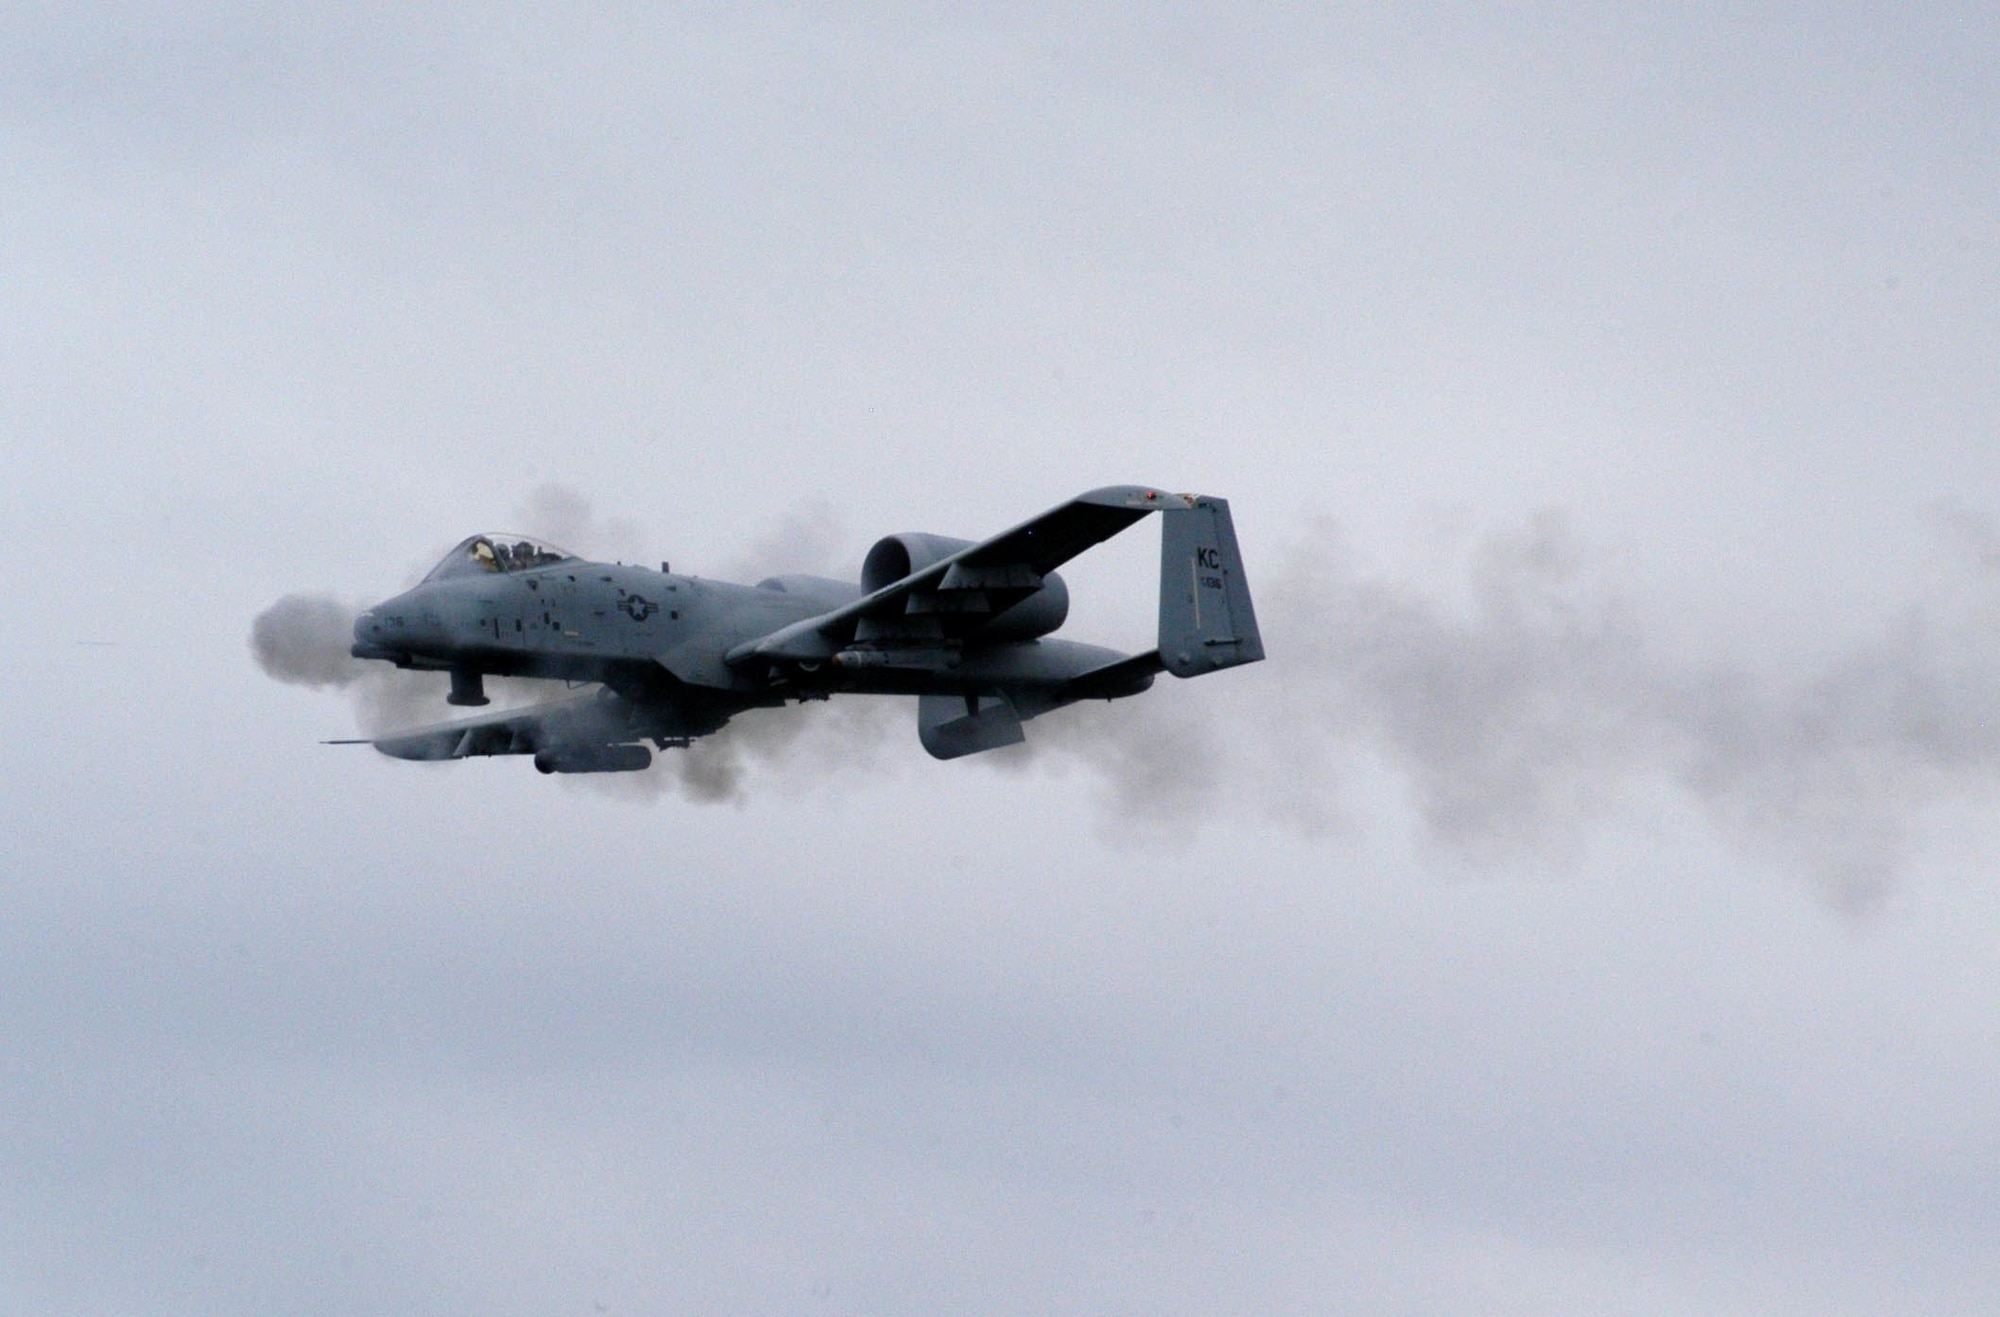 An A-10 Thunderbolt II flies from right to left and trails smoke from its nose gun as it fires.